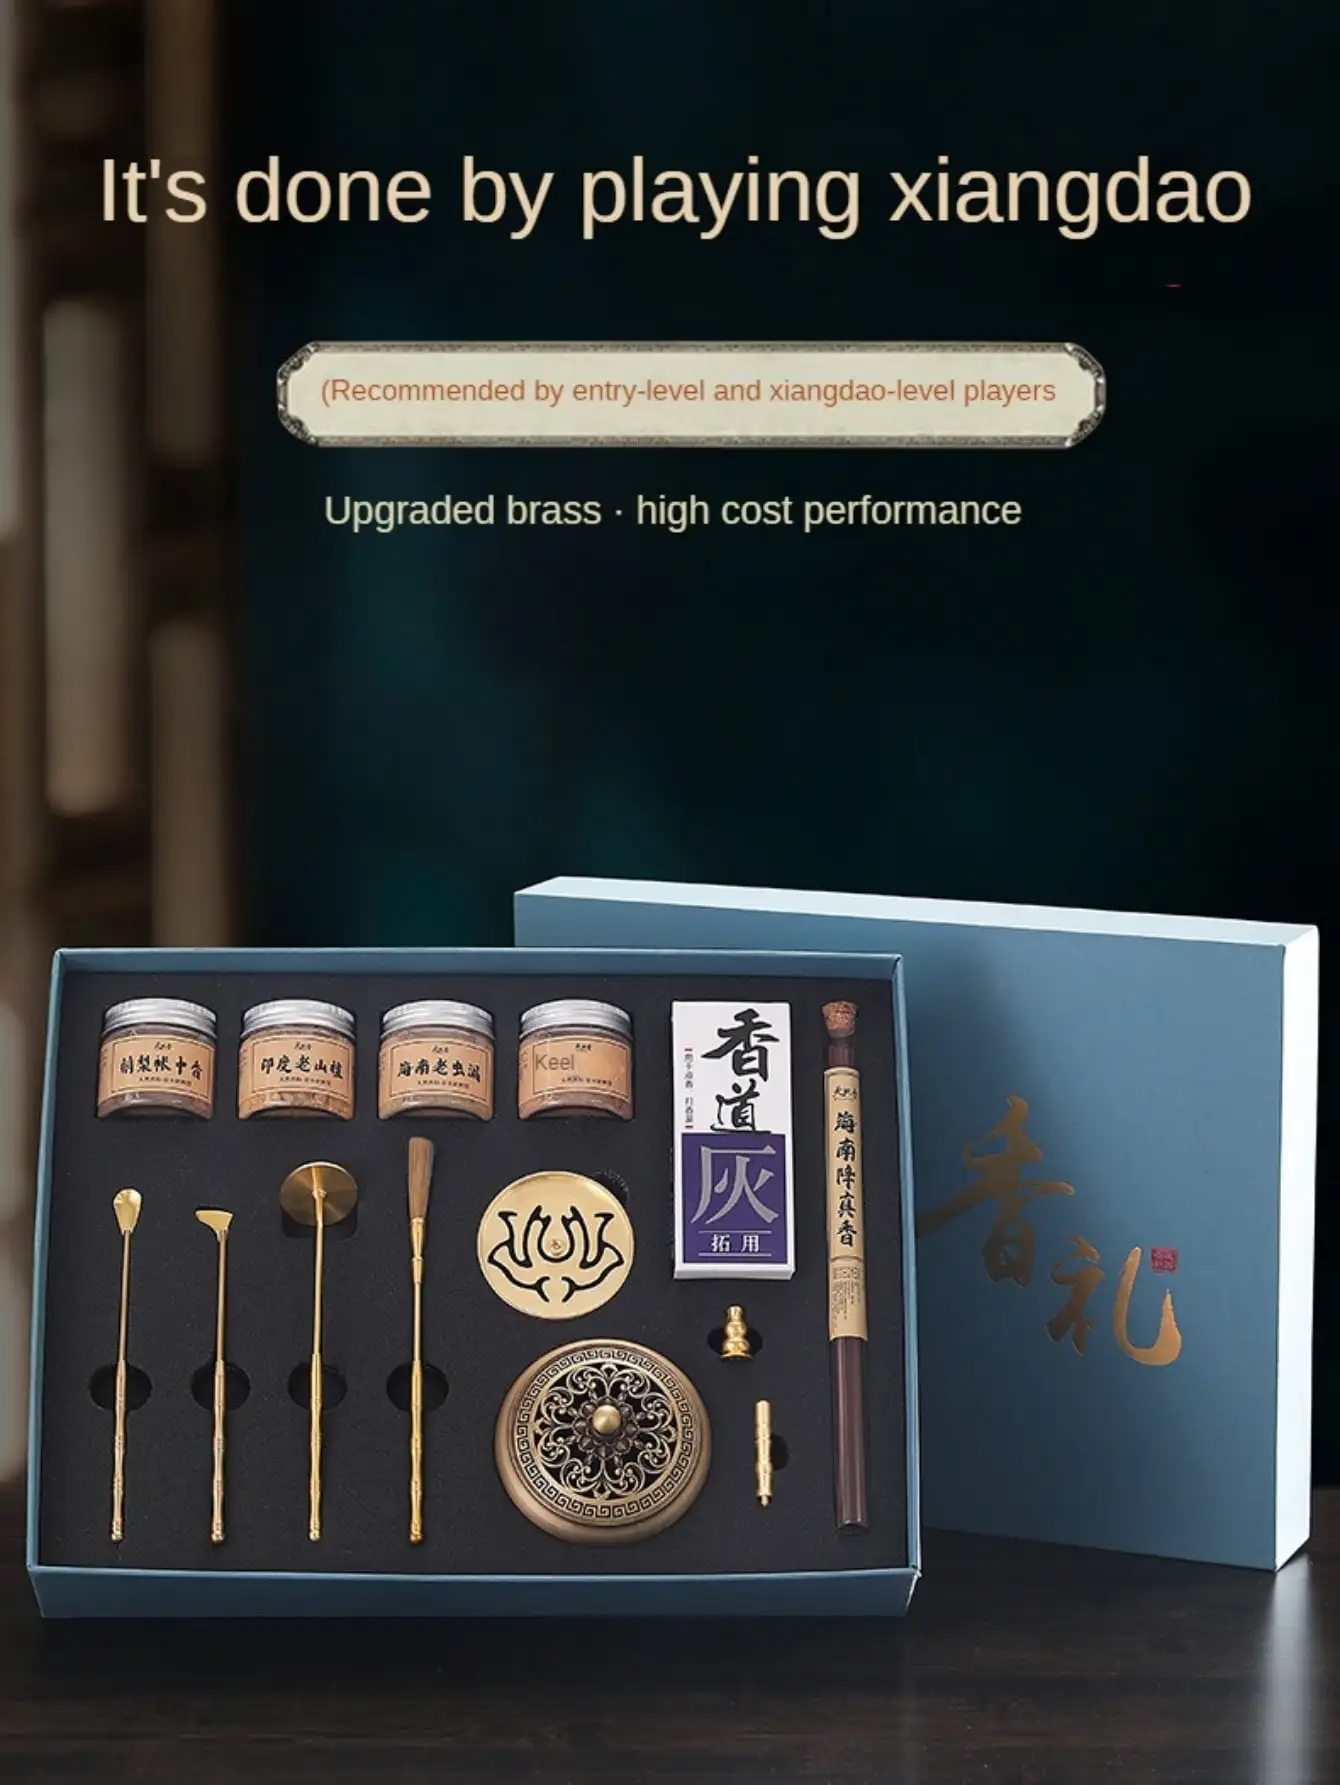 <p>We will remove the gift box when we ship these two incense seal sets (no gift box set), so be careful if you mind!
Product list: without gift box 13 piece set A or without gift box 13 piece set B Tips:
1, the kind of artificial measurement, there will be some errors, please understand!
2, physical photography, all rights reserved. There may be some color differences due to different shooting lights and monitors. Use the actual object to prevail.
3. Regarding the size, different visual errors will occur due to different shooting angles. The product details have detailed sizes, so it is recommended to prepare a small ruler to determine the size.
4. Support agent delivery and wholesale orders.
Wholesale orders: Please contact us for wholesale prices.
Shipping Order: Please leave a shipping order note in your order so that our colleagues can see it and it will not contain invoices, our store information, etc.
5. What should I do if the goods are damaged or defective or less or I don't like it?
Please contact us before writing a comment or raising a dispute. We can refund the money or resend new items to you.
6. Are there any tariffs?
Paying taxes according to local laws is a basic duty of citizens. Please pay duty according to local policy. Thank you very much!</p>
<p>
Shopping guide
Add to Cart -> Continue Shopping -> View Cart -> Check All Items -> Buy Now -> Select Logistics method -> Confirm payment.</p>
<p>transport
1. Tracking information is available for orders over $5, so we recommend you order over $5 or choose a delivery with tracking information.
2. All orders will be shipped within 1-5 business days after payment.
3. We ship your package DDU, "duties and taxes unpaid", if customs clearance occurs, you are responsible for paying any additional charges.
4. Delivery time: It usually takes about 15-30 working days after release. But sometimes there can be delays of 30-60 working days, as shipping times can vary, especially during holidays.</p>
<p>refunds
1. You have the right to return and replace items (except for damage caused by improper operation, use and wear). However, you need to pay the full cost of both shipments (including shipping, taxes, customs fees, etc.) and keep the items in good condition.
2. Note: Please count our quantity before returning the item to us. Thank you very much.</p>
<p>Feedback and Communication
1. Thank you very much for your early confirmation upon receipt of the goods.
2. We maintain high standards of excellence and strive for 100% customer satisfaction! We appreciate the positive feedback from 5 Stars, which is good for our long-term business.
3. Before you give us neutral or negative feedback or raise a dispute, please contact us immediately and we will try our best to resolve the problem.</p> • Colma.do™ • 2023 •